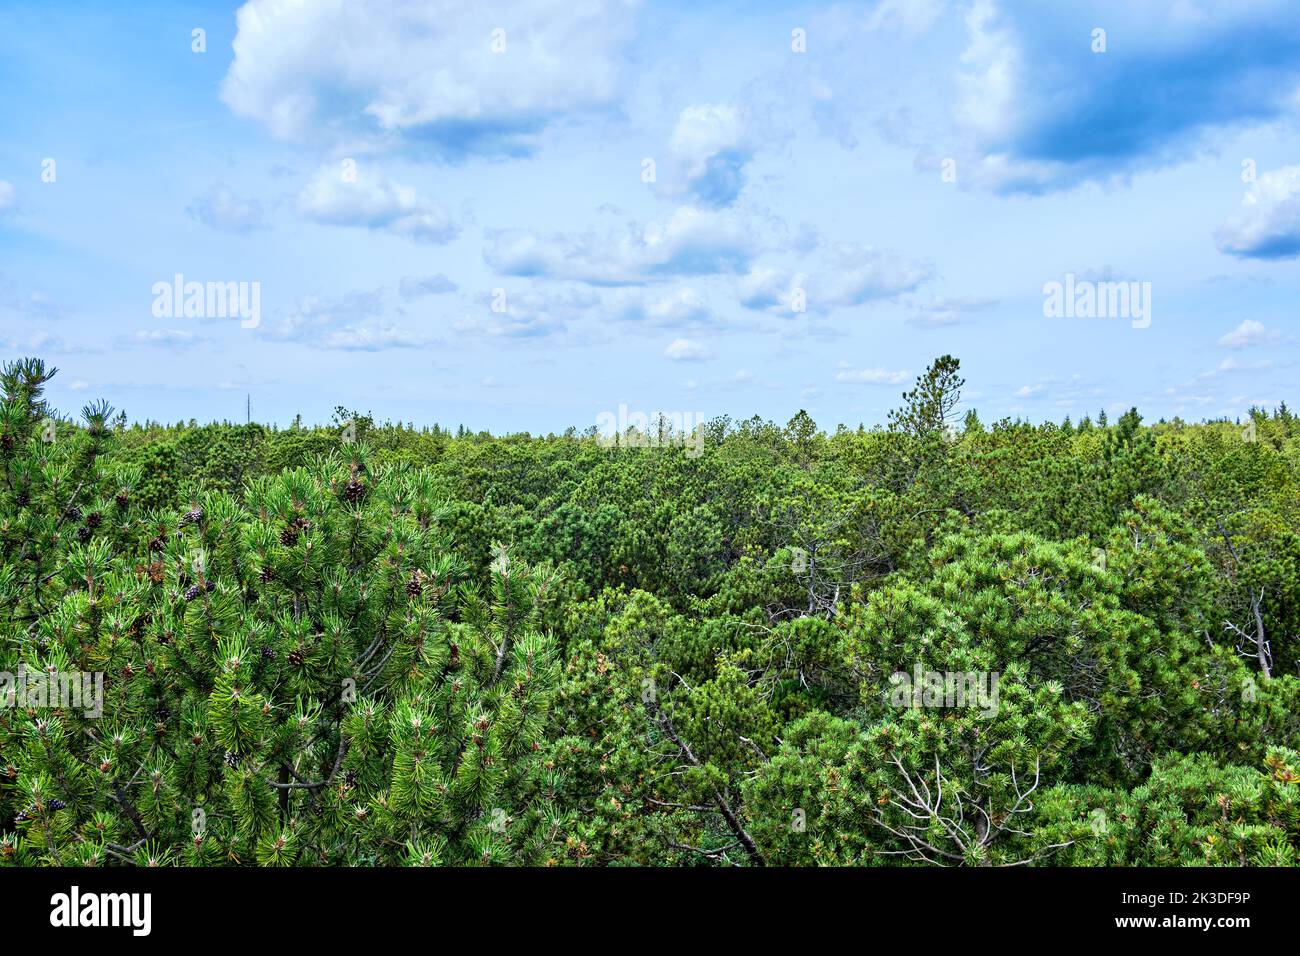 Vegetation and scenery in the nature reserve of the Georgenfeld Raised Bog (Georgenfelder Hochmoor ), Altenberg, Saxony, Germany. Stock Photo